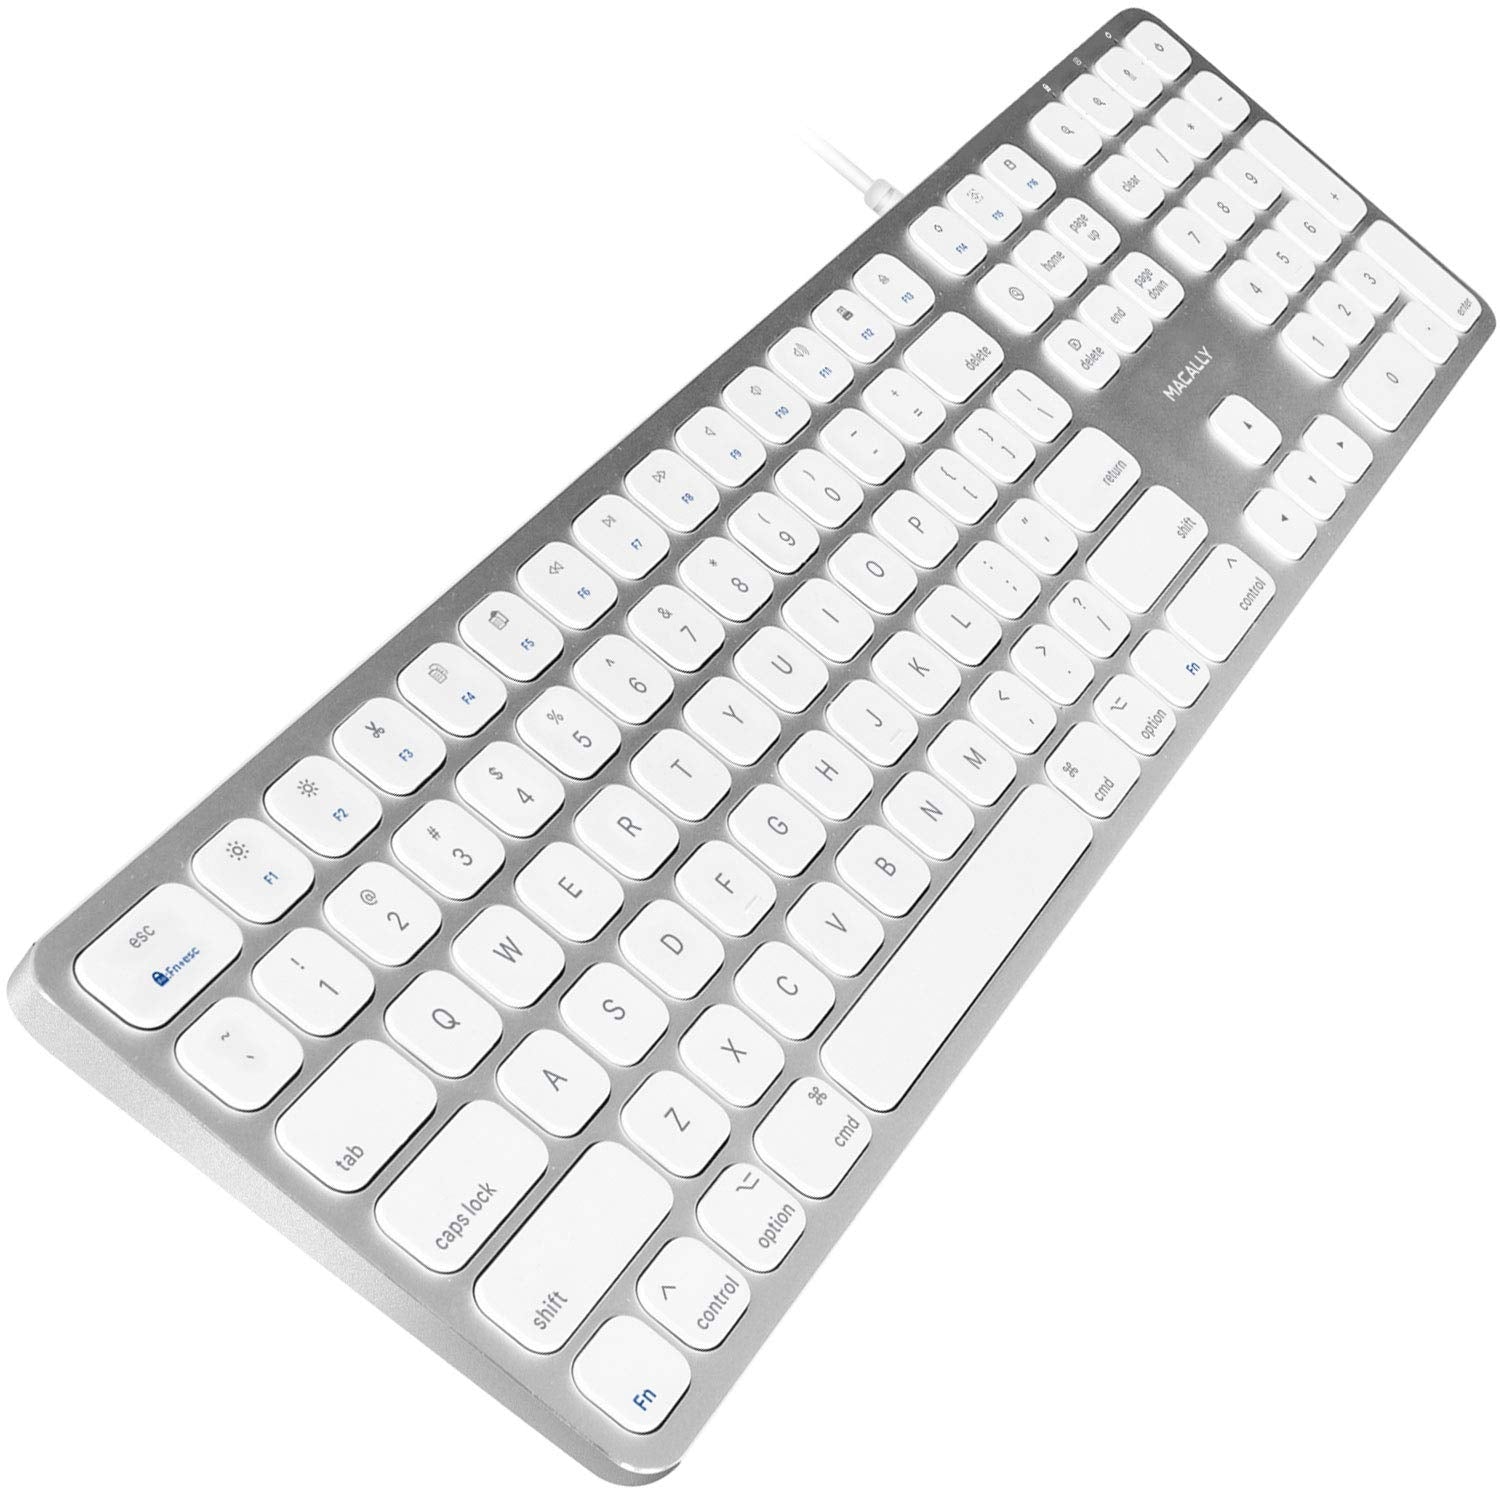 Macally Aluminum Silver Wireless Keyboard with an Ergonomic Silver Laptop Stand, Better Your Workspace